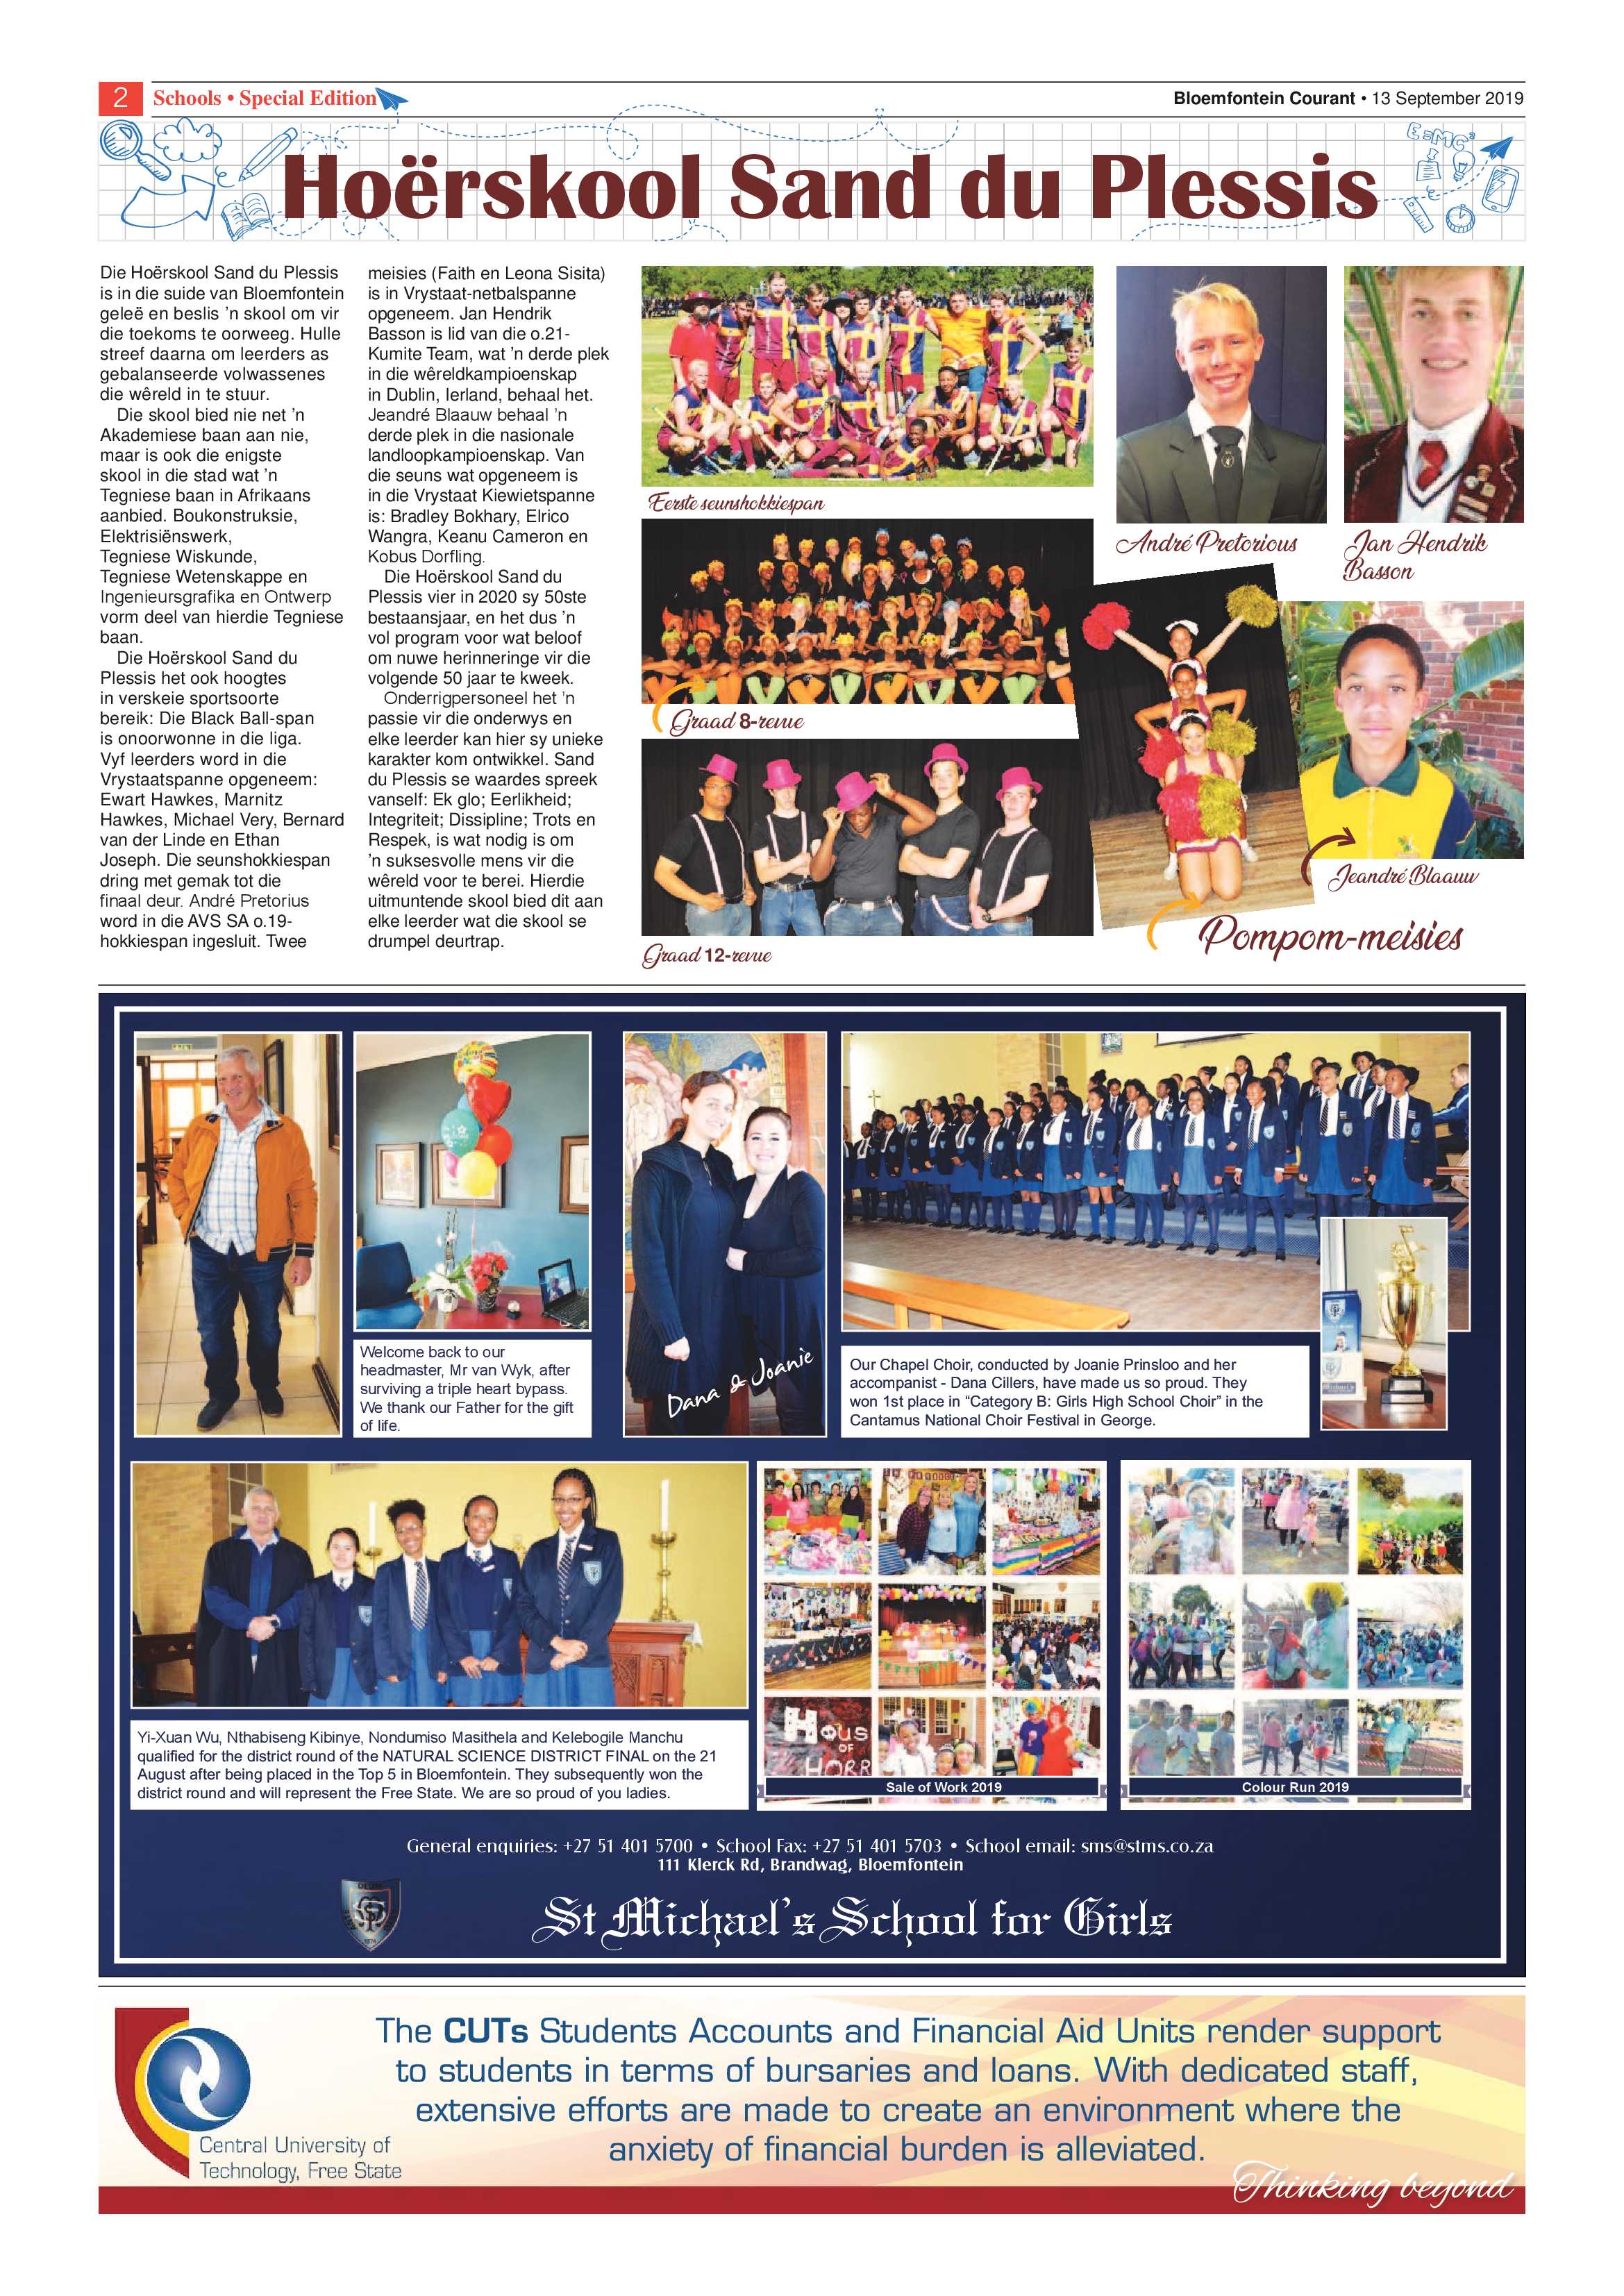 courant-13-june-2019-school-special-edition-epapers-page-2